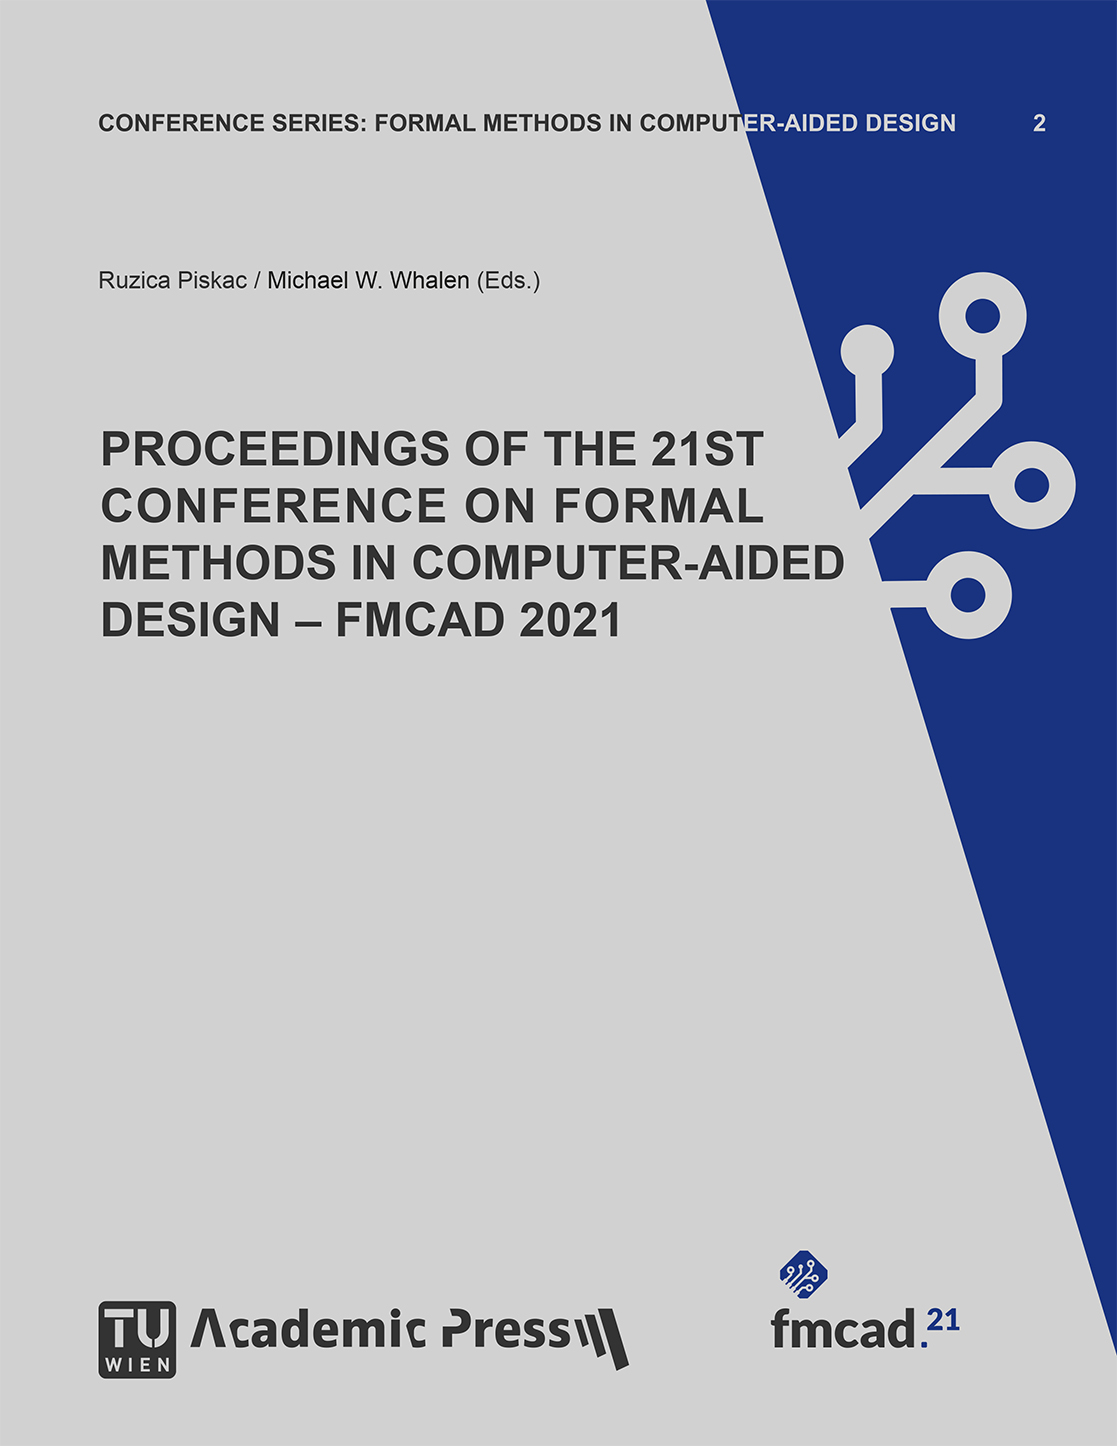 PROCEEDINGS OF THE 21ST CONFERENCE ON FORMAL METHODS IN COMPUTER-AIDED DESIGN – FMCAD 2021